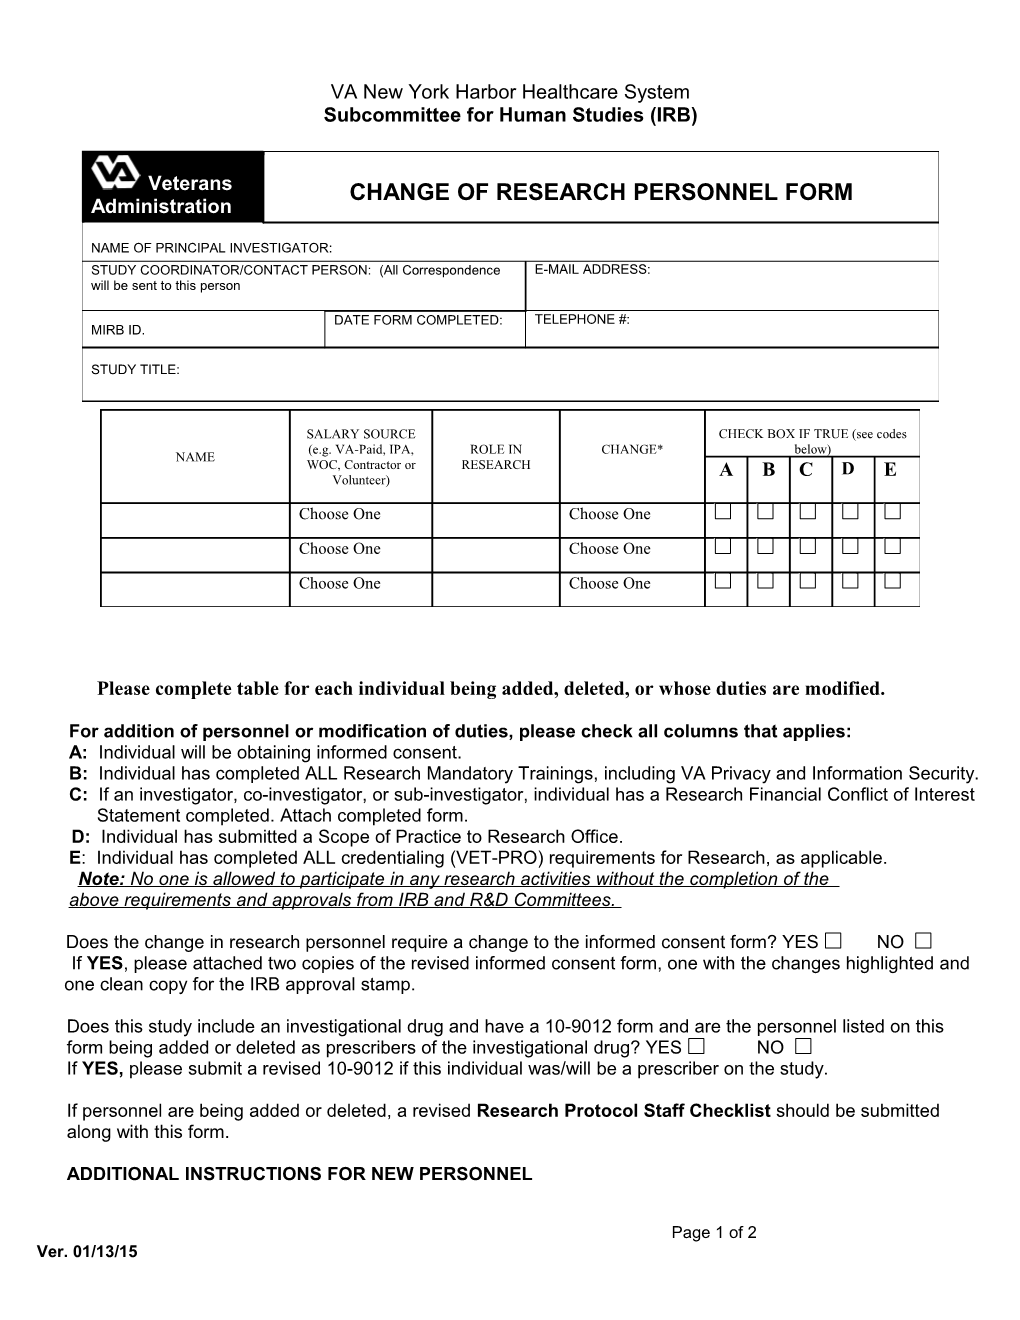 Change of Research Personnel Form